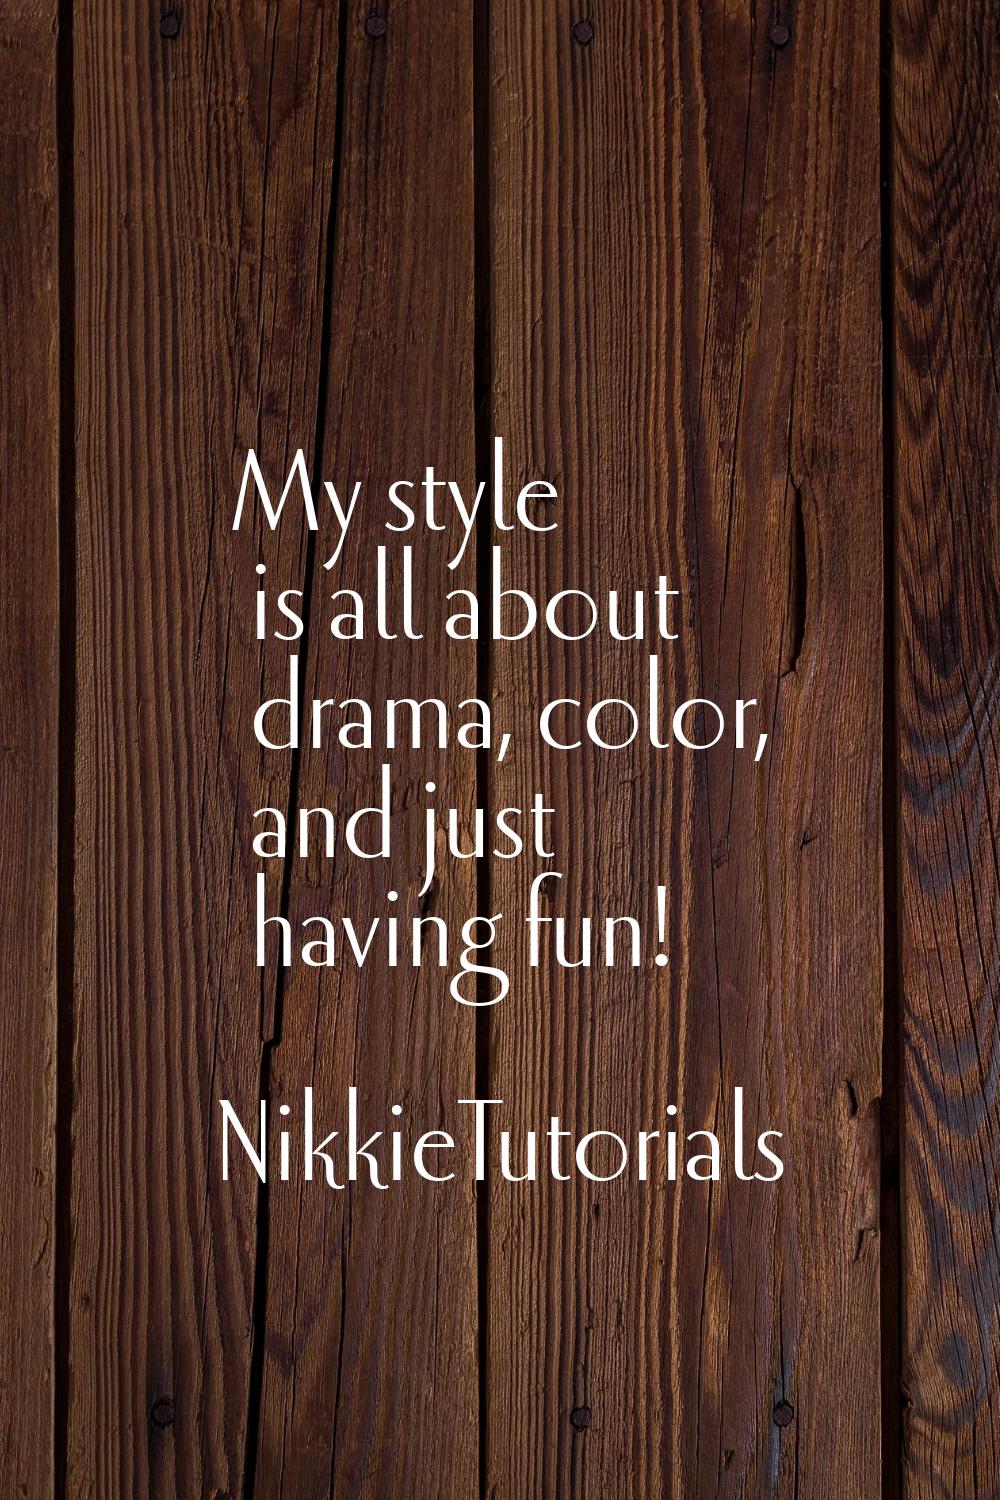 My style is all about drama, color, and just having fun!